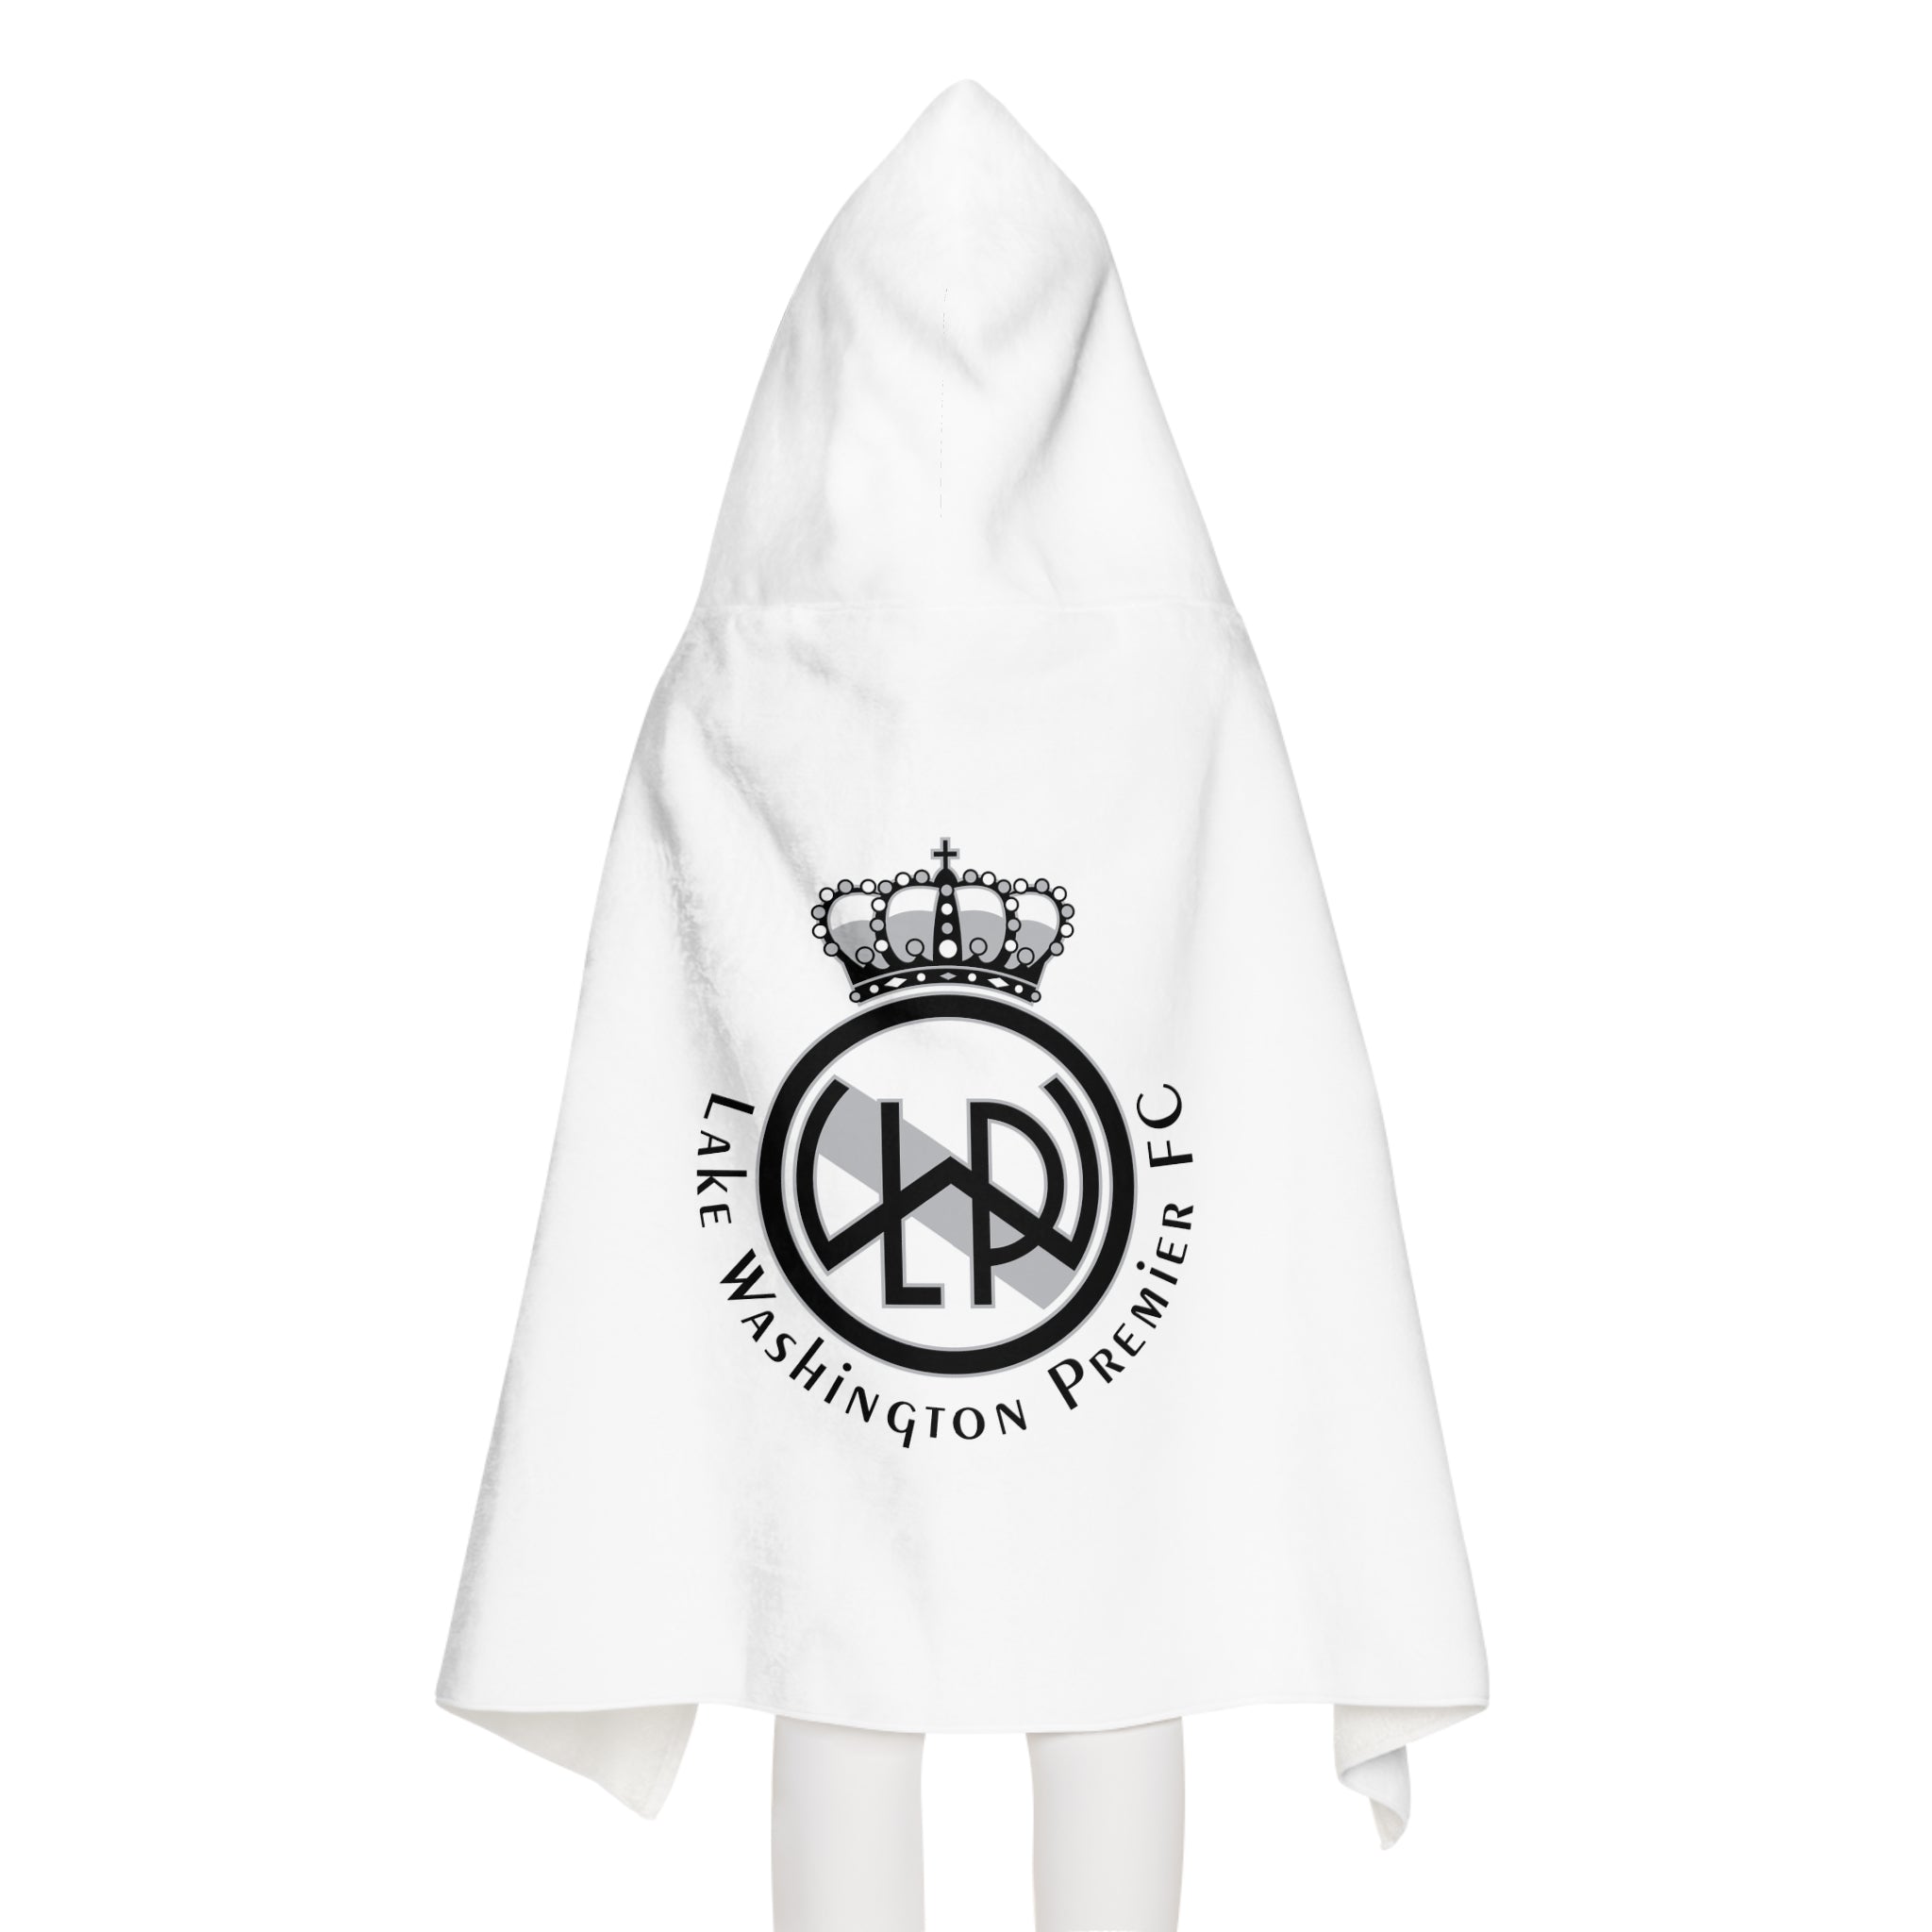 LWPFC Youth Hooded Towel